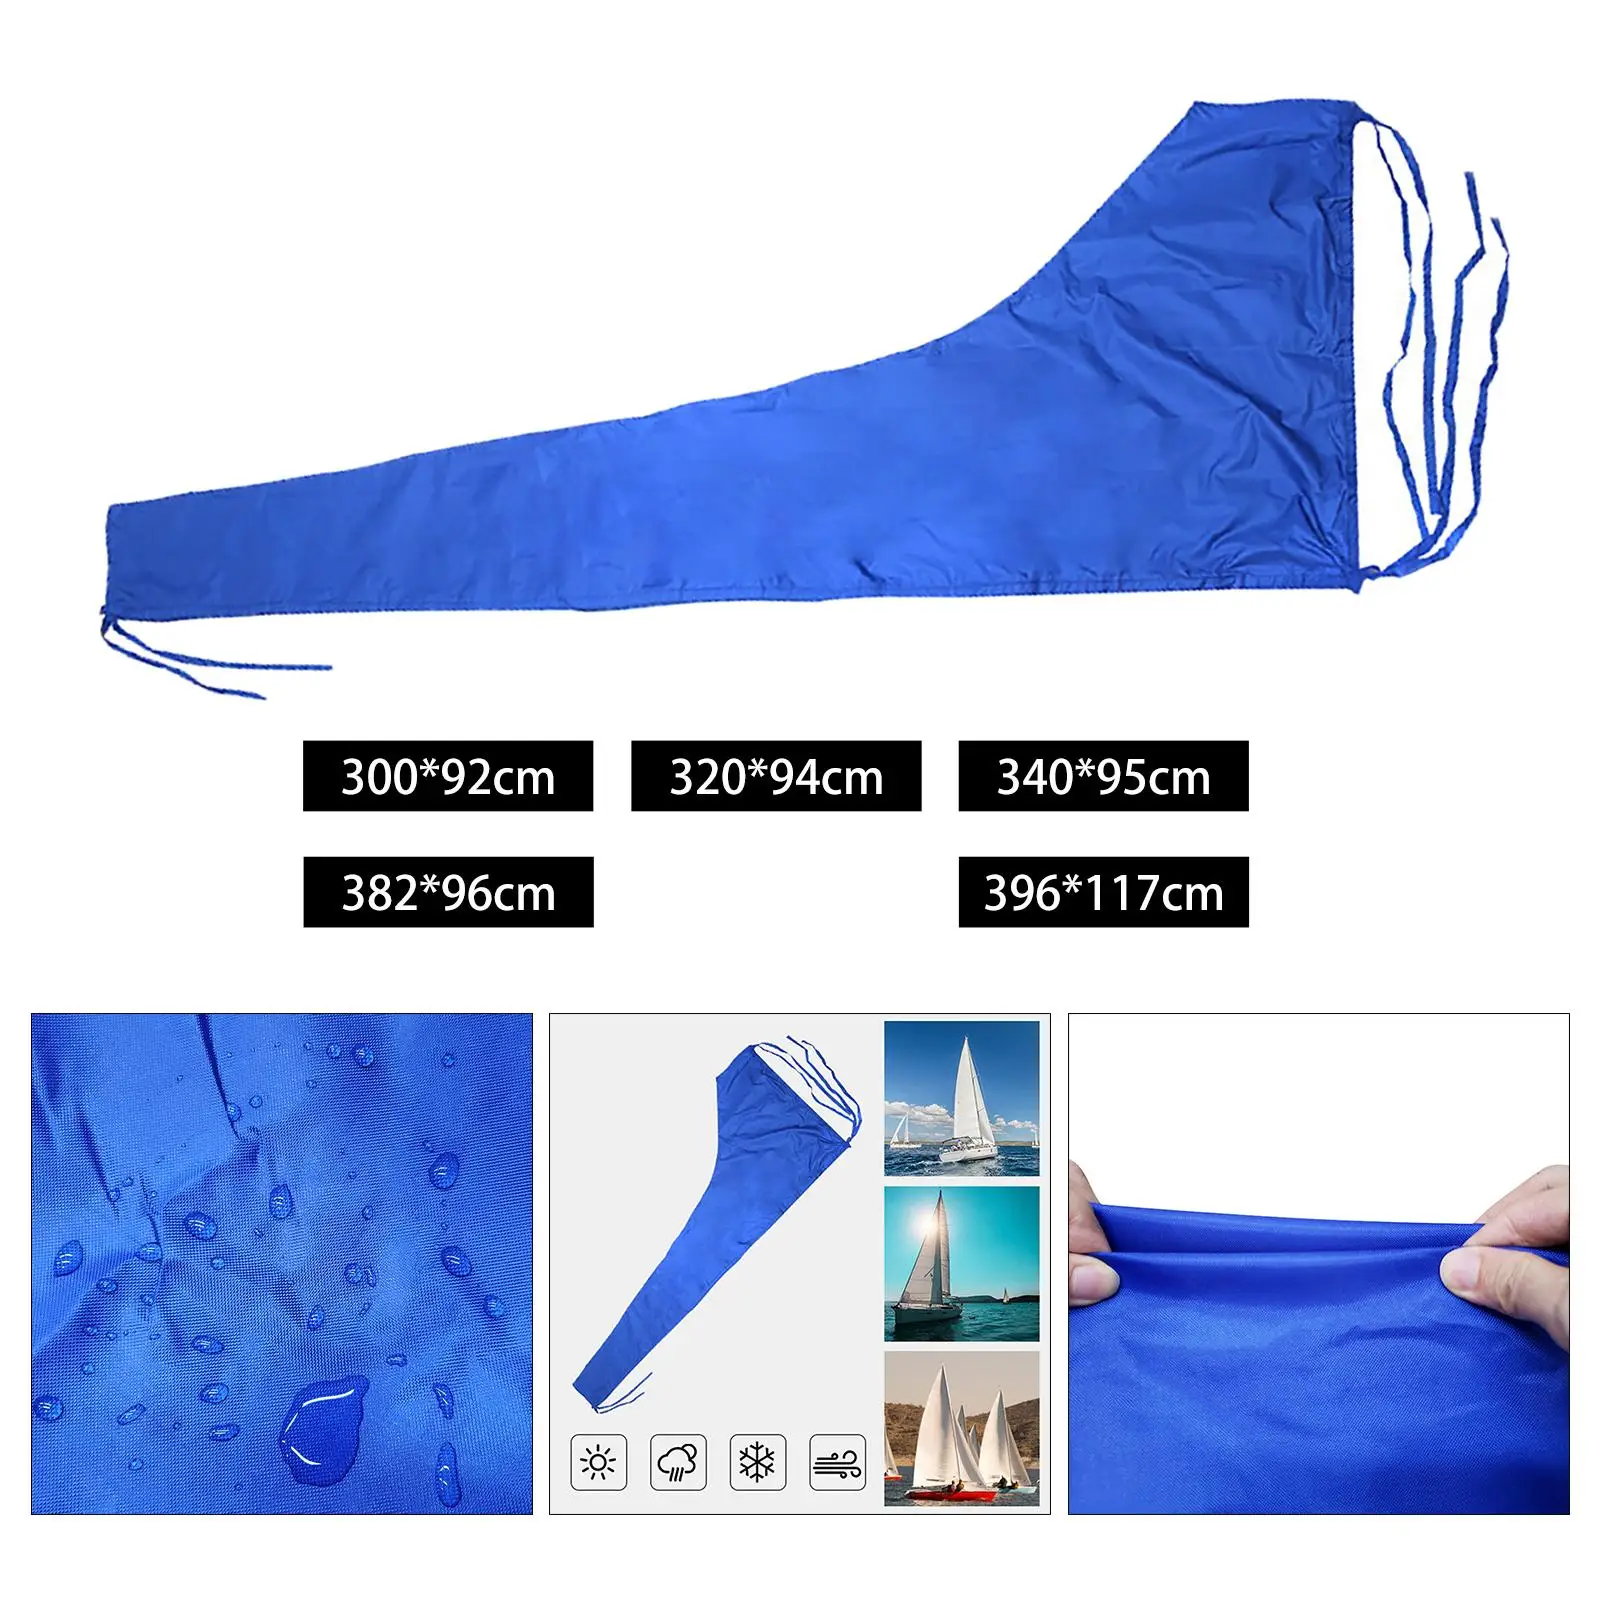 Mainsail Boom Cover Seamless Protection Boat Accessories Boat Cover Blue